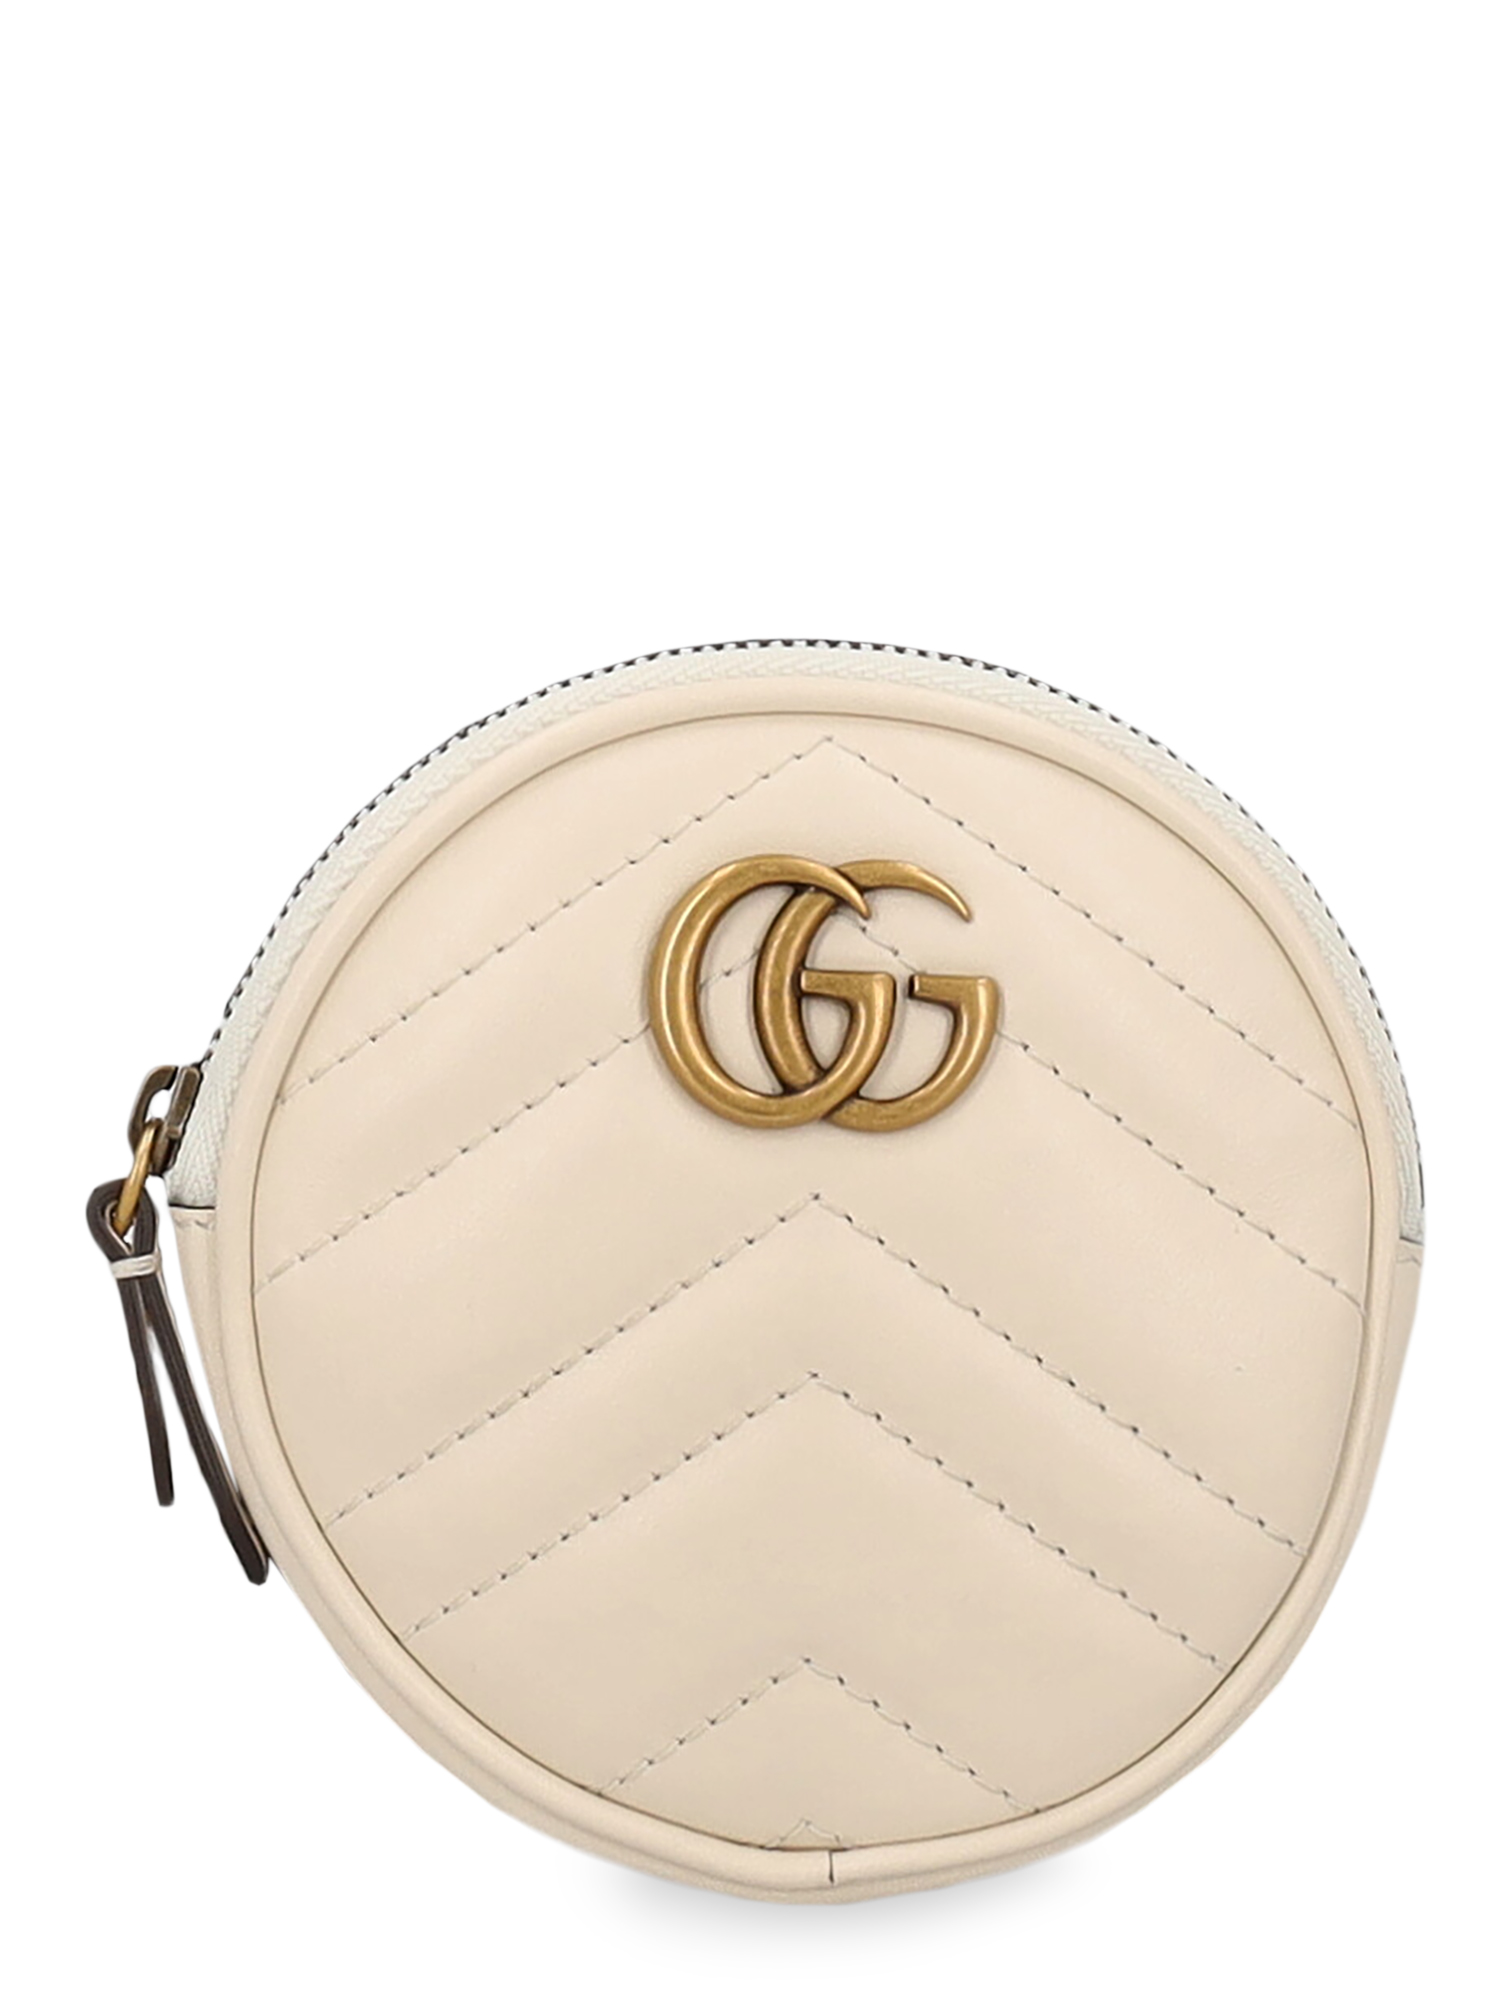 Pre-owned Gucci Women's Keychains -  - In White Leather